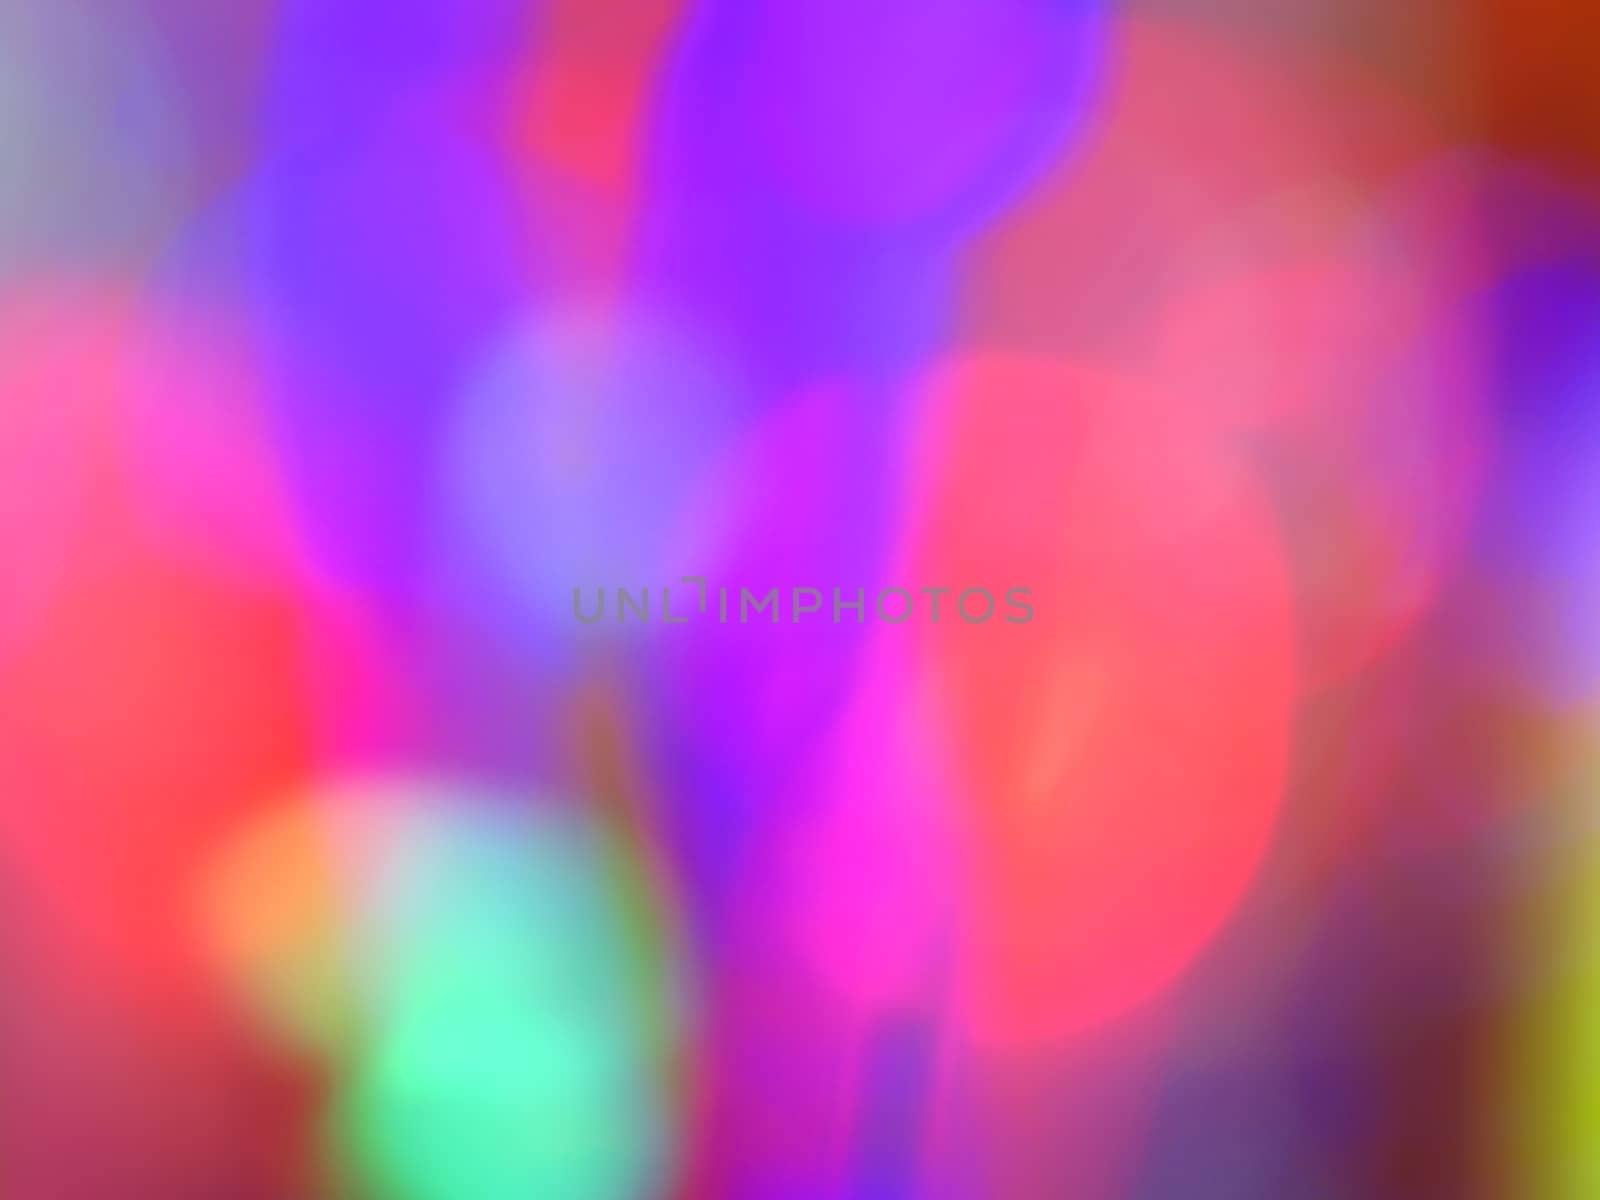 A background with blur pattern of different bright colored hues                               